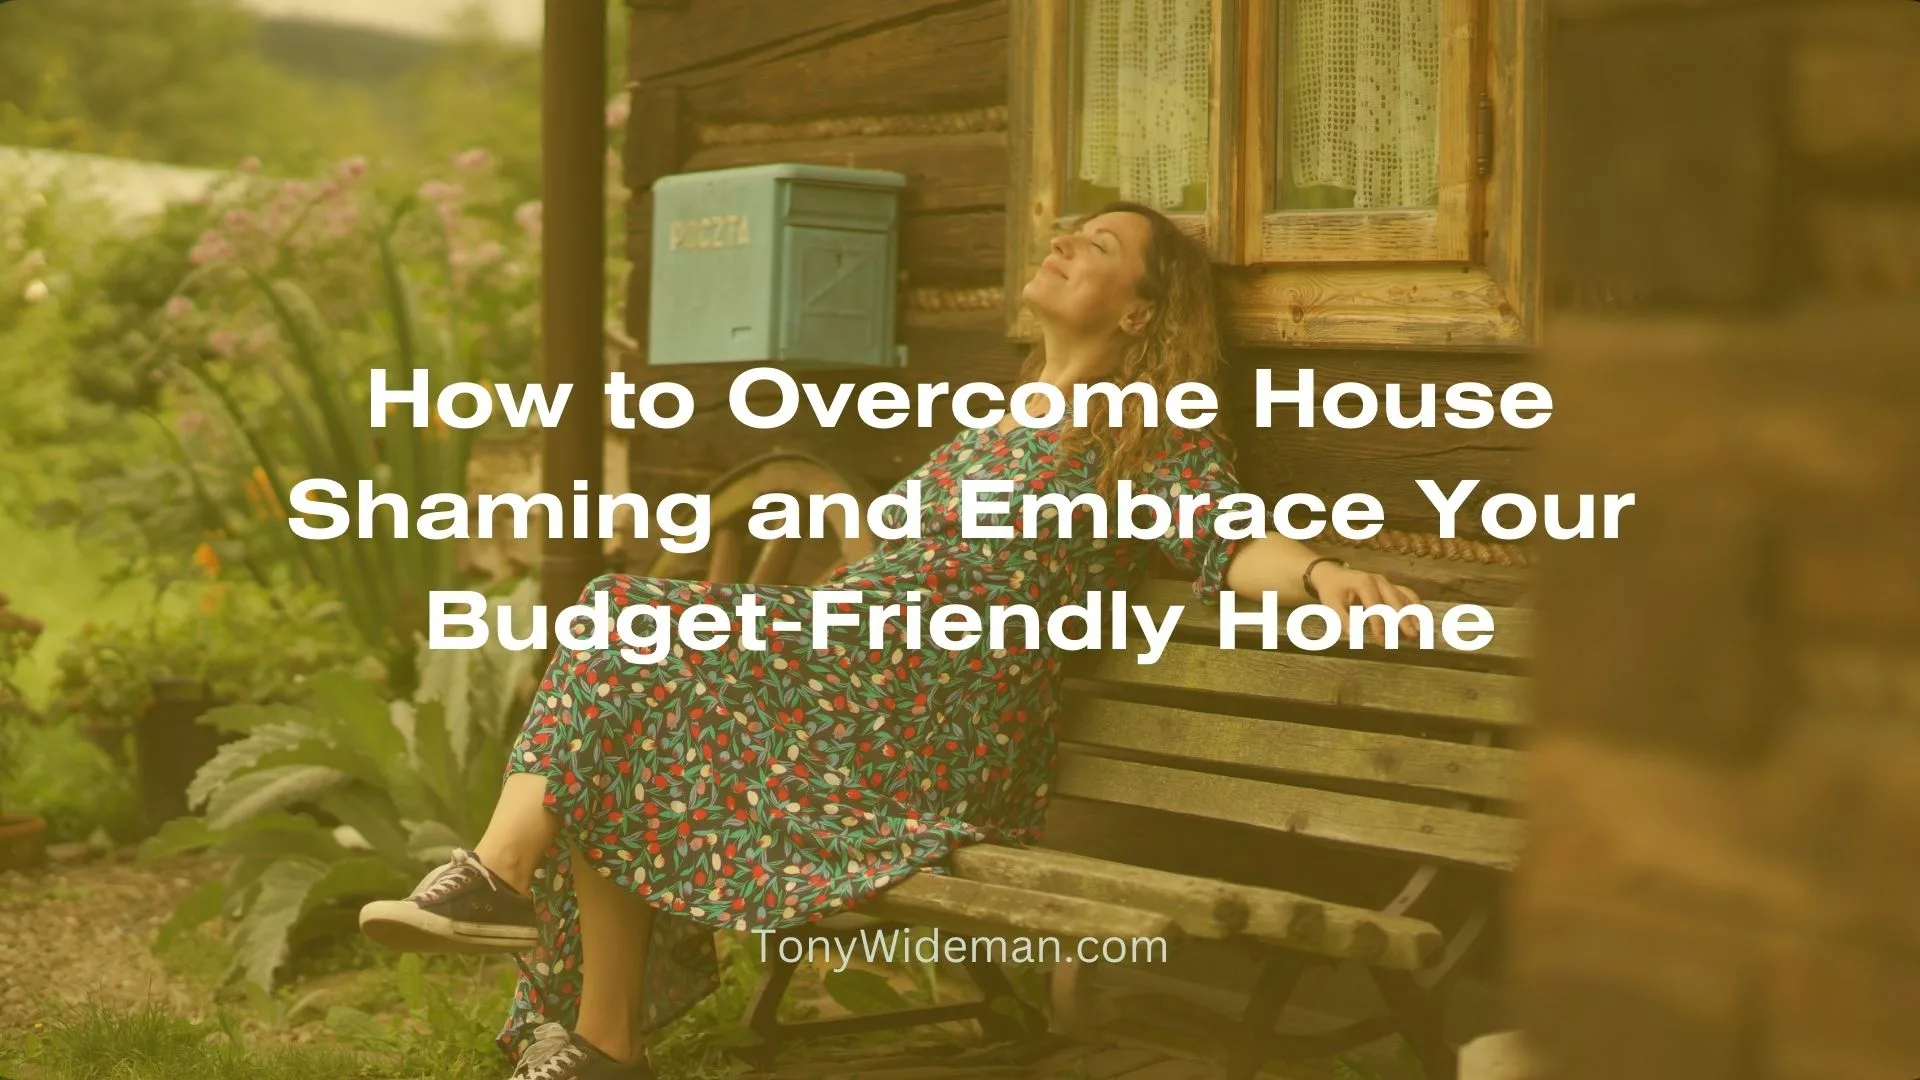 How-to-Overcome-House-Shaming-and-Embrace-Your-Budget-Friendly-Home